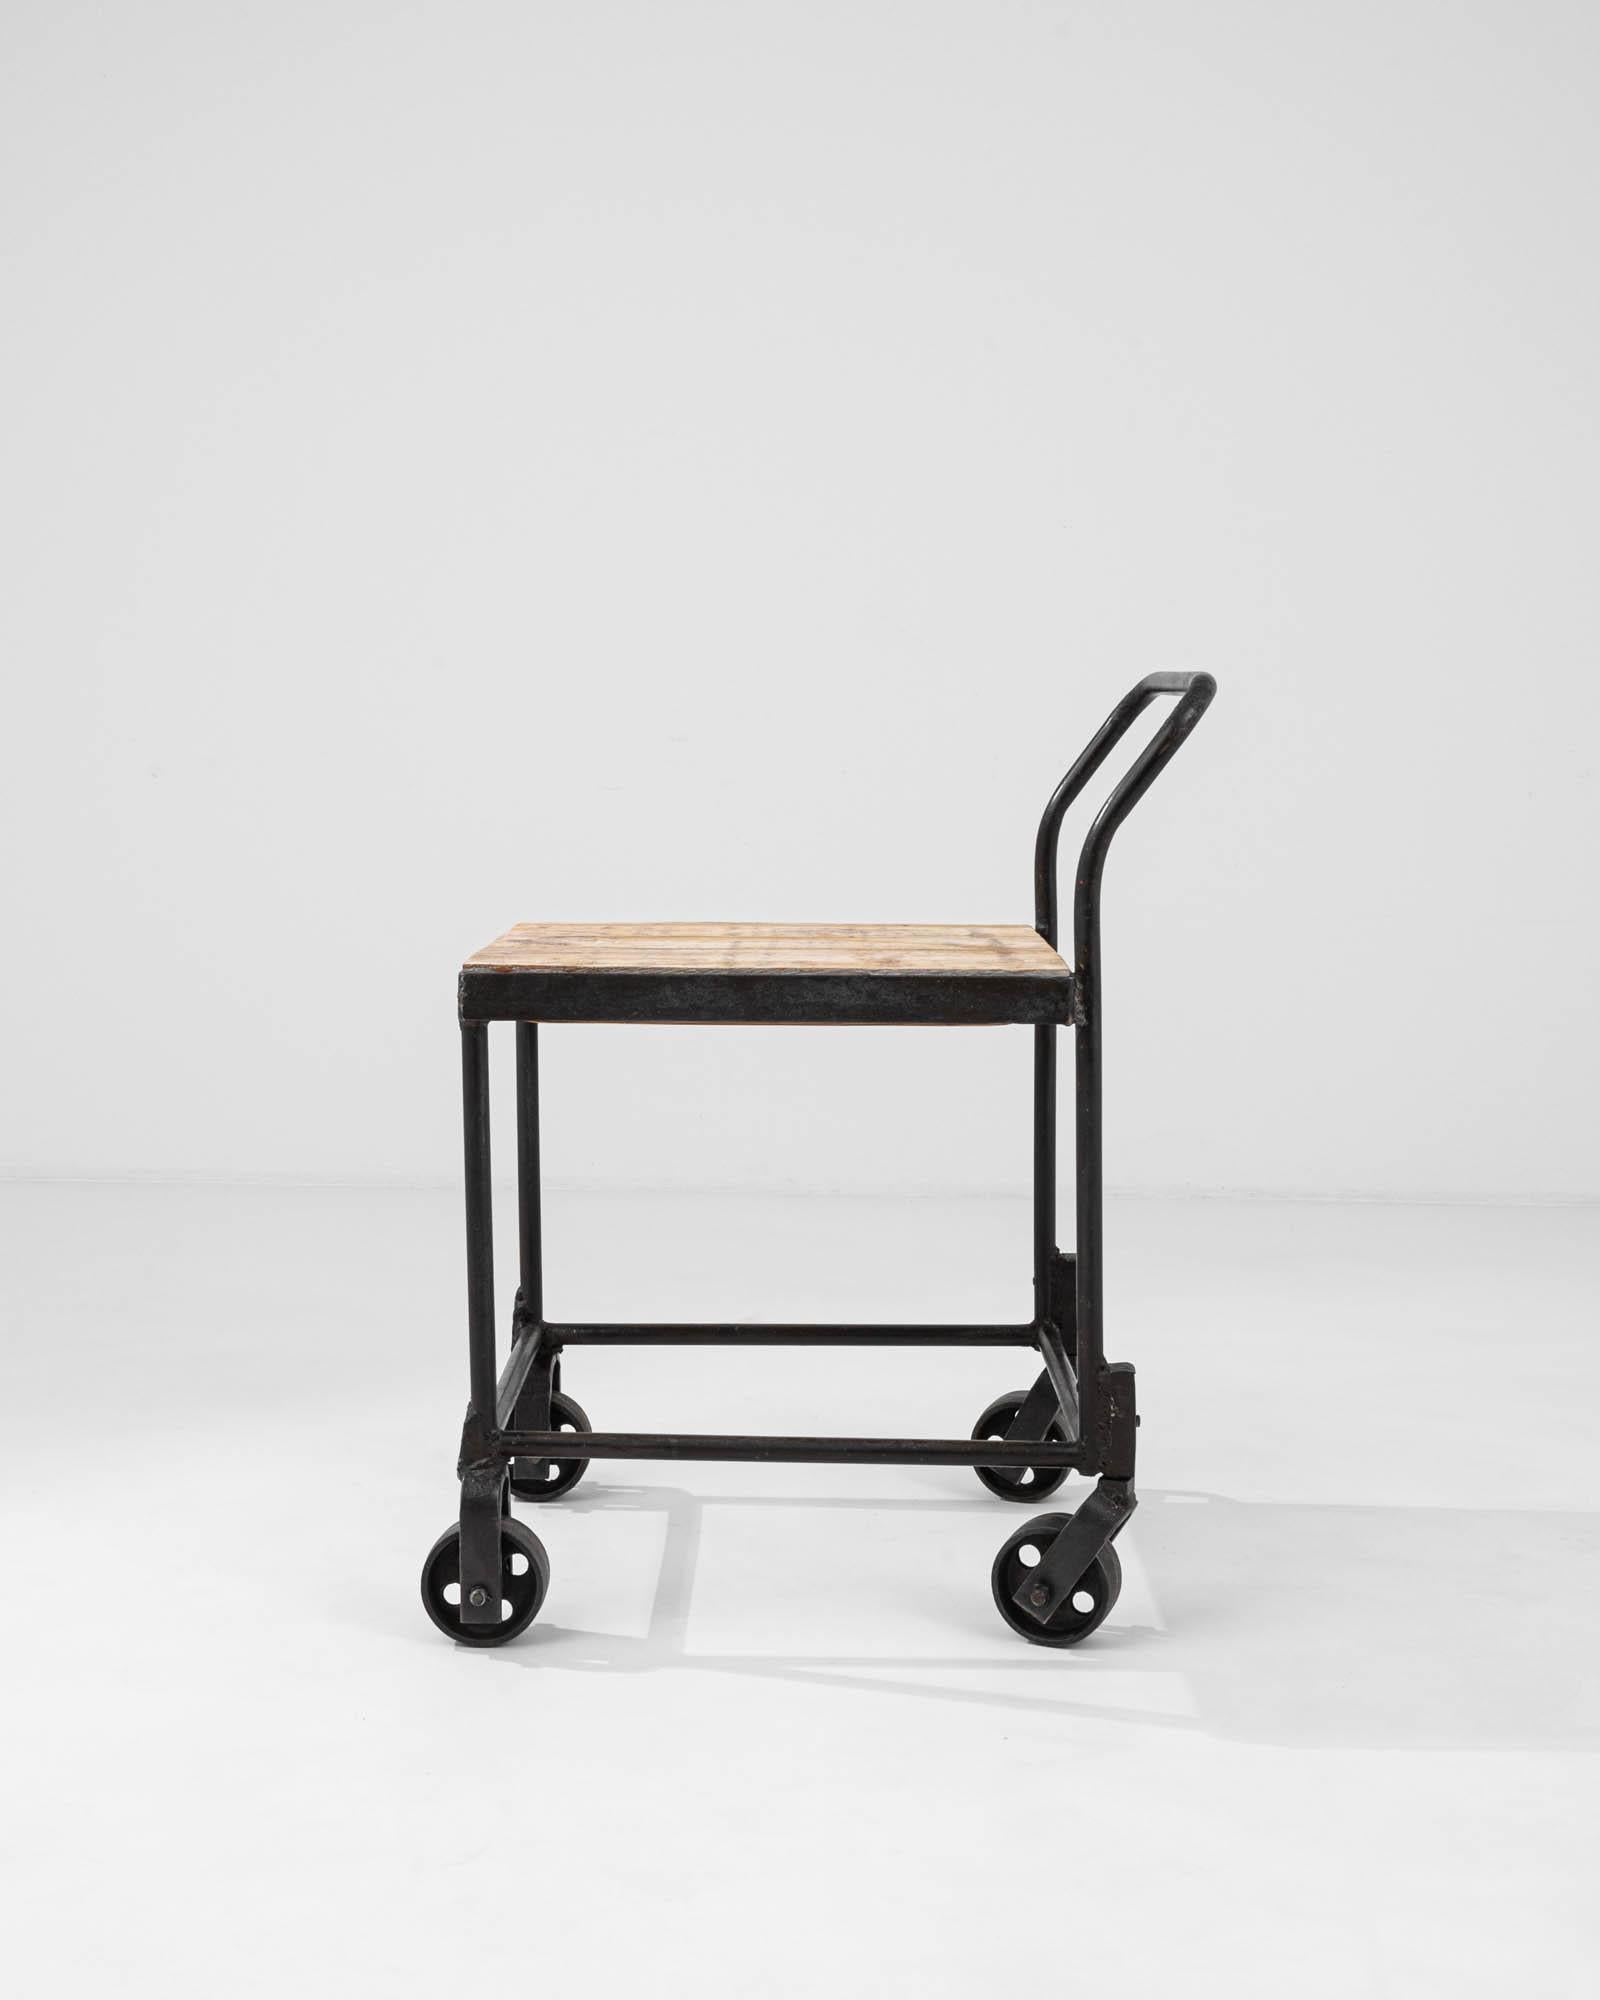 This 20th Century French Metal Bar Cart marries practicality with industrial flair, creating a versatile piece steeped in history. The cart features a sturdy metal frame, exuding the raw elegance of industrial design with its minimalist lines and